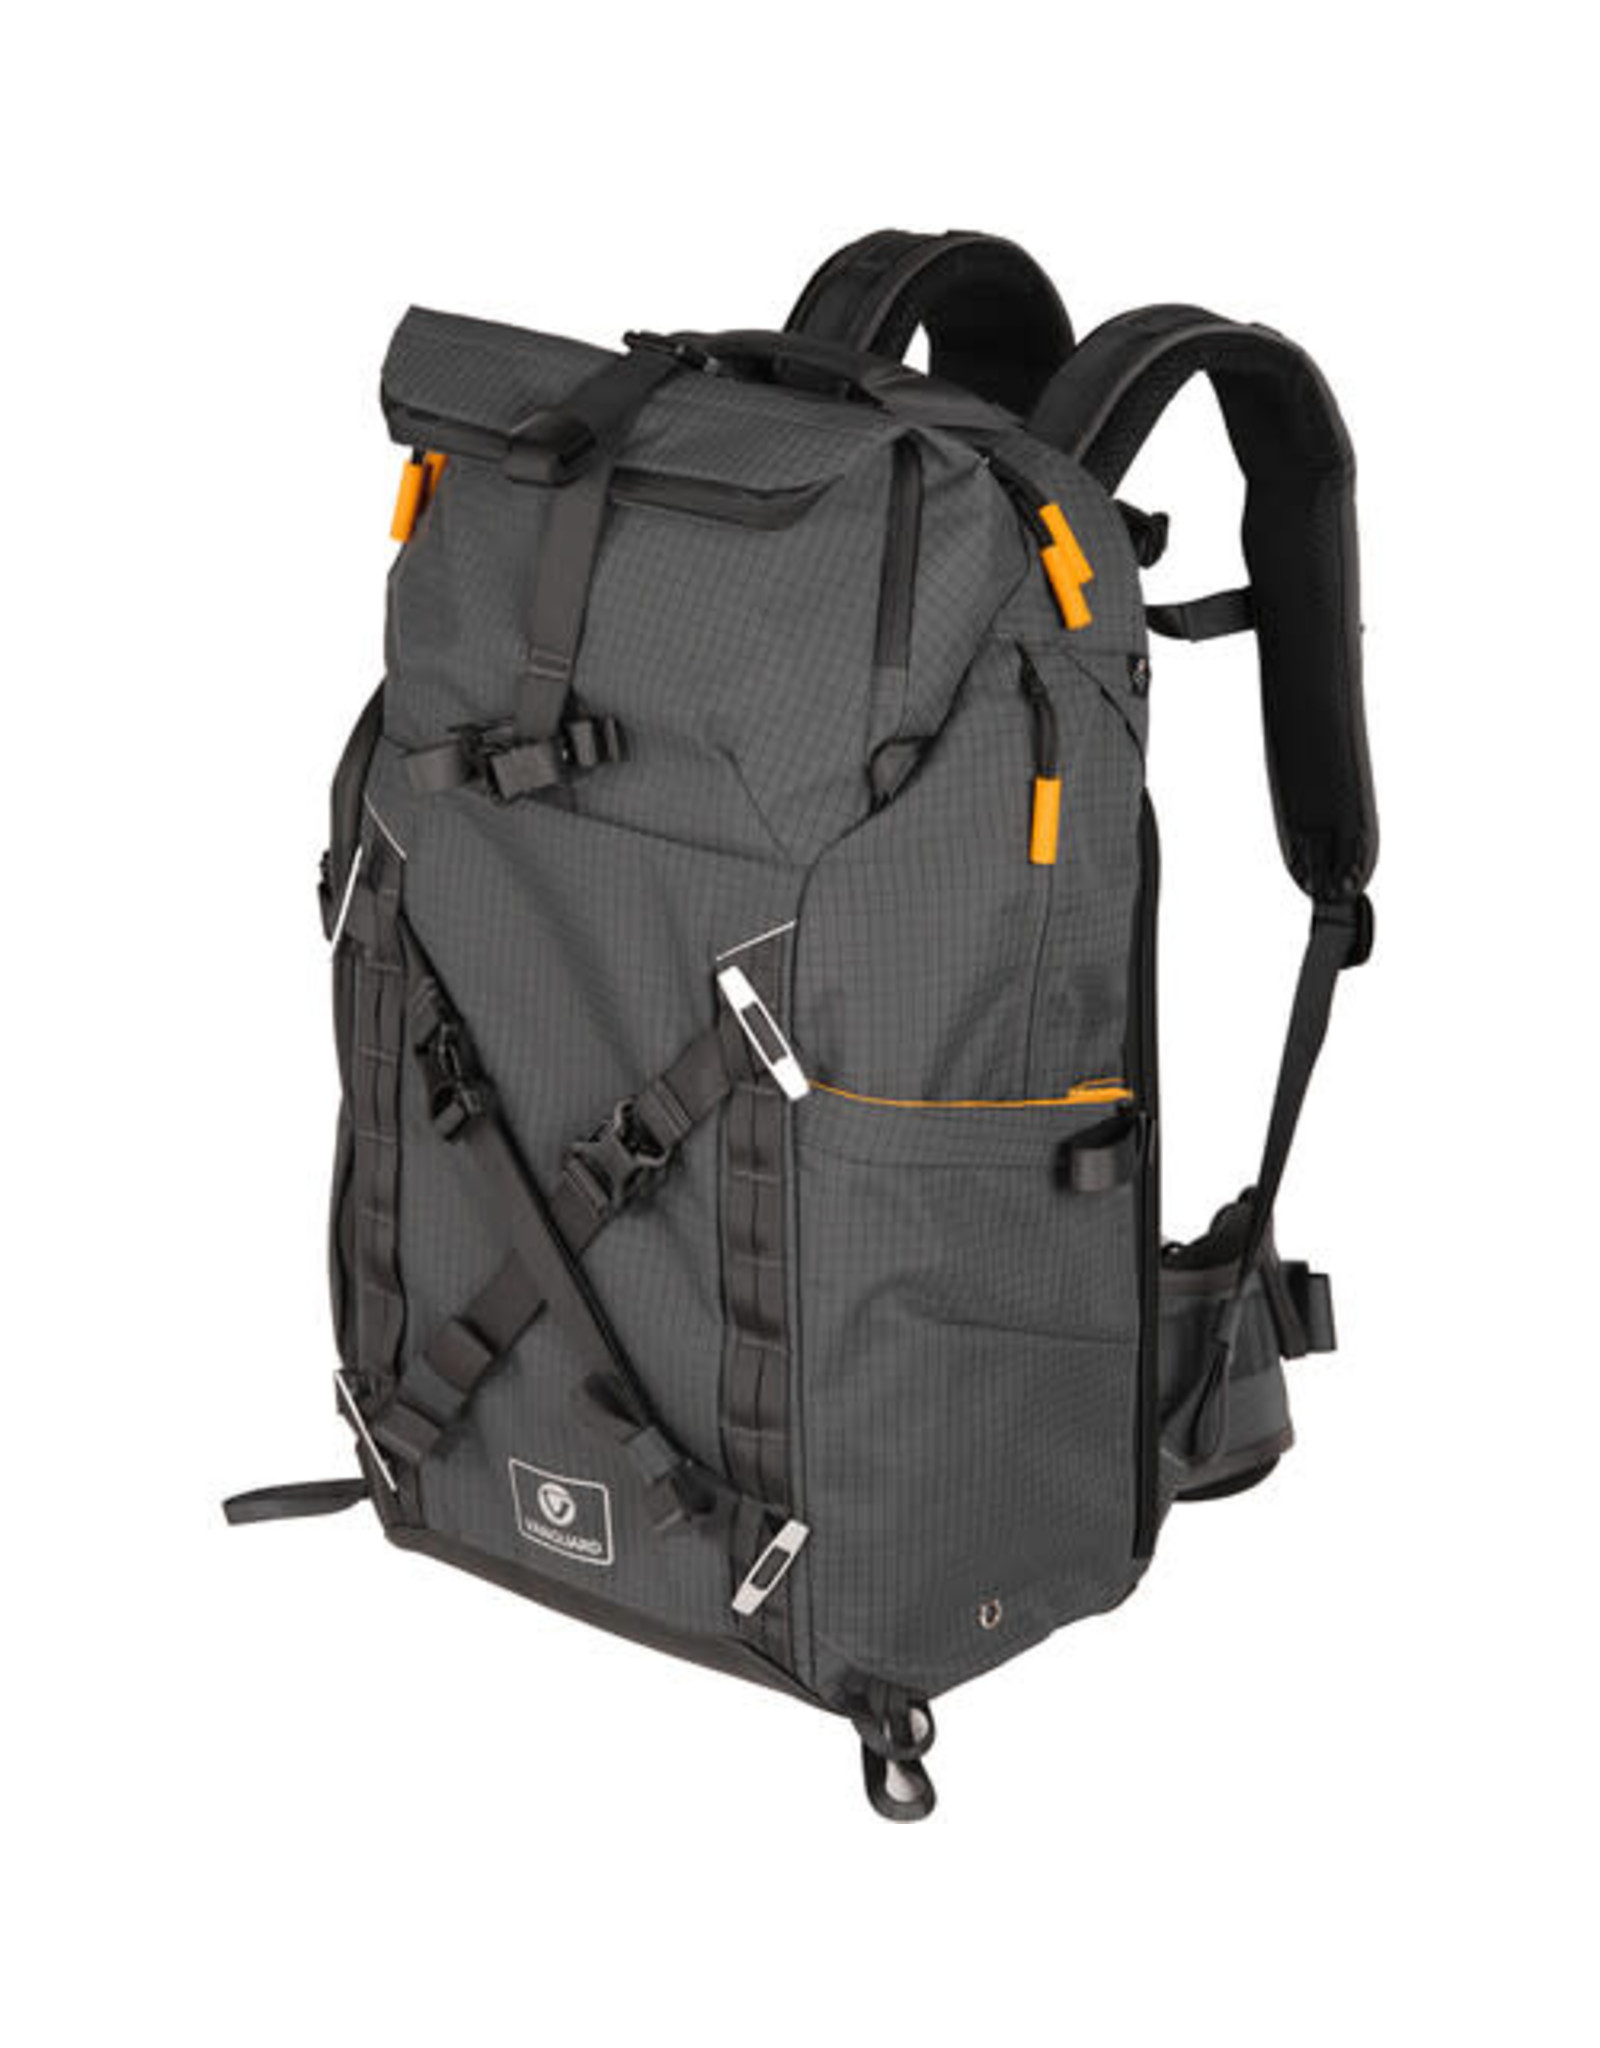 Vanguard VEO ACTIVE 53 CAMERA BACKPACK W/ USB CHARGER CONNECTION (CHOOSE COLOR)